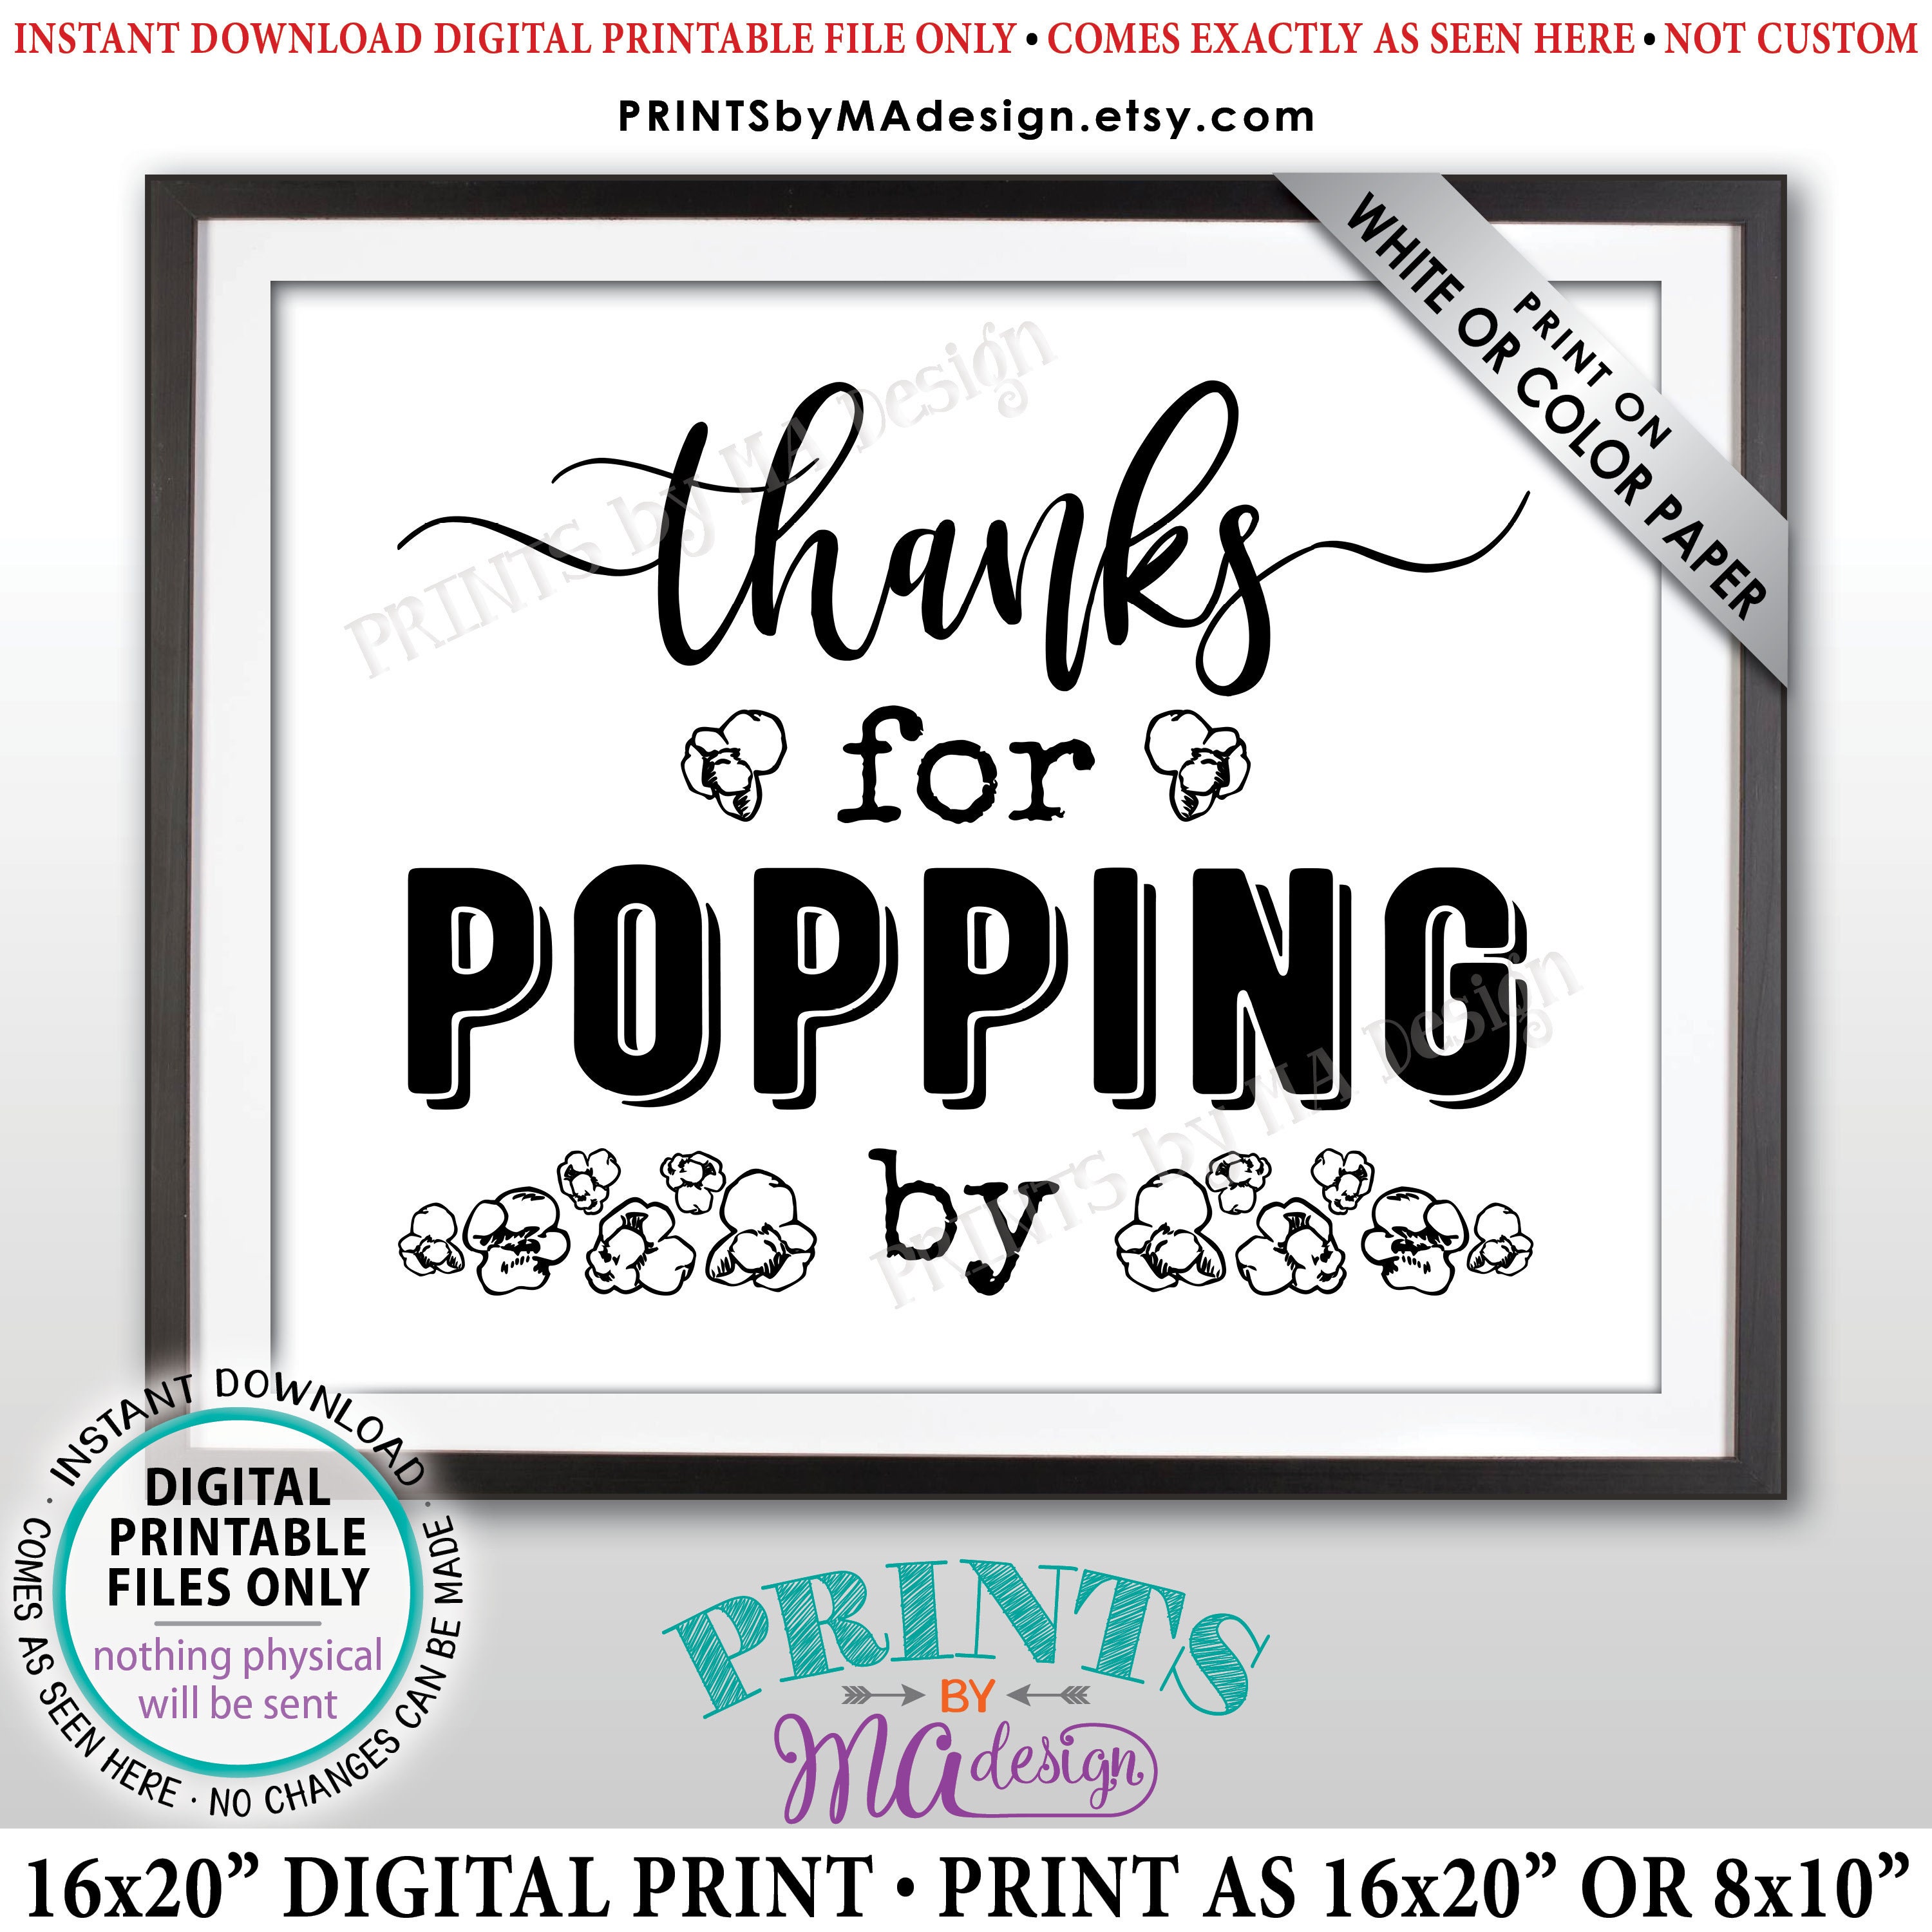 Thanks For Popping In Free Printable Printable Word Searches